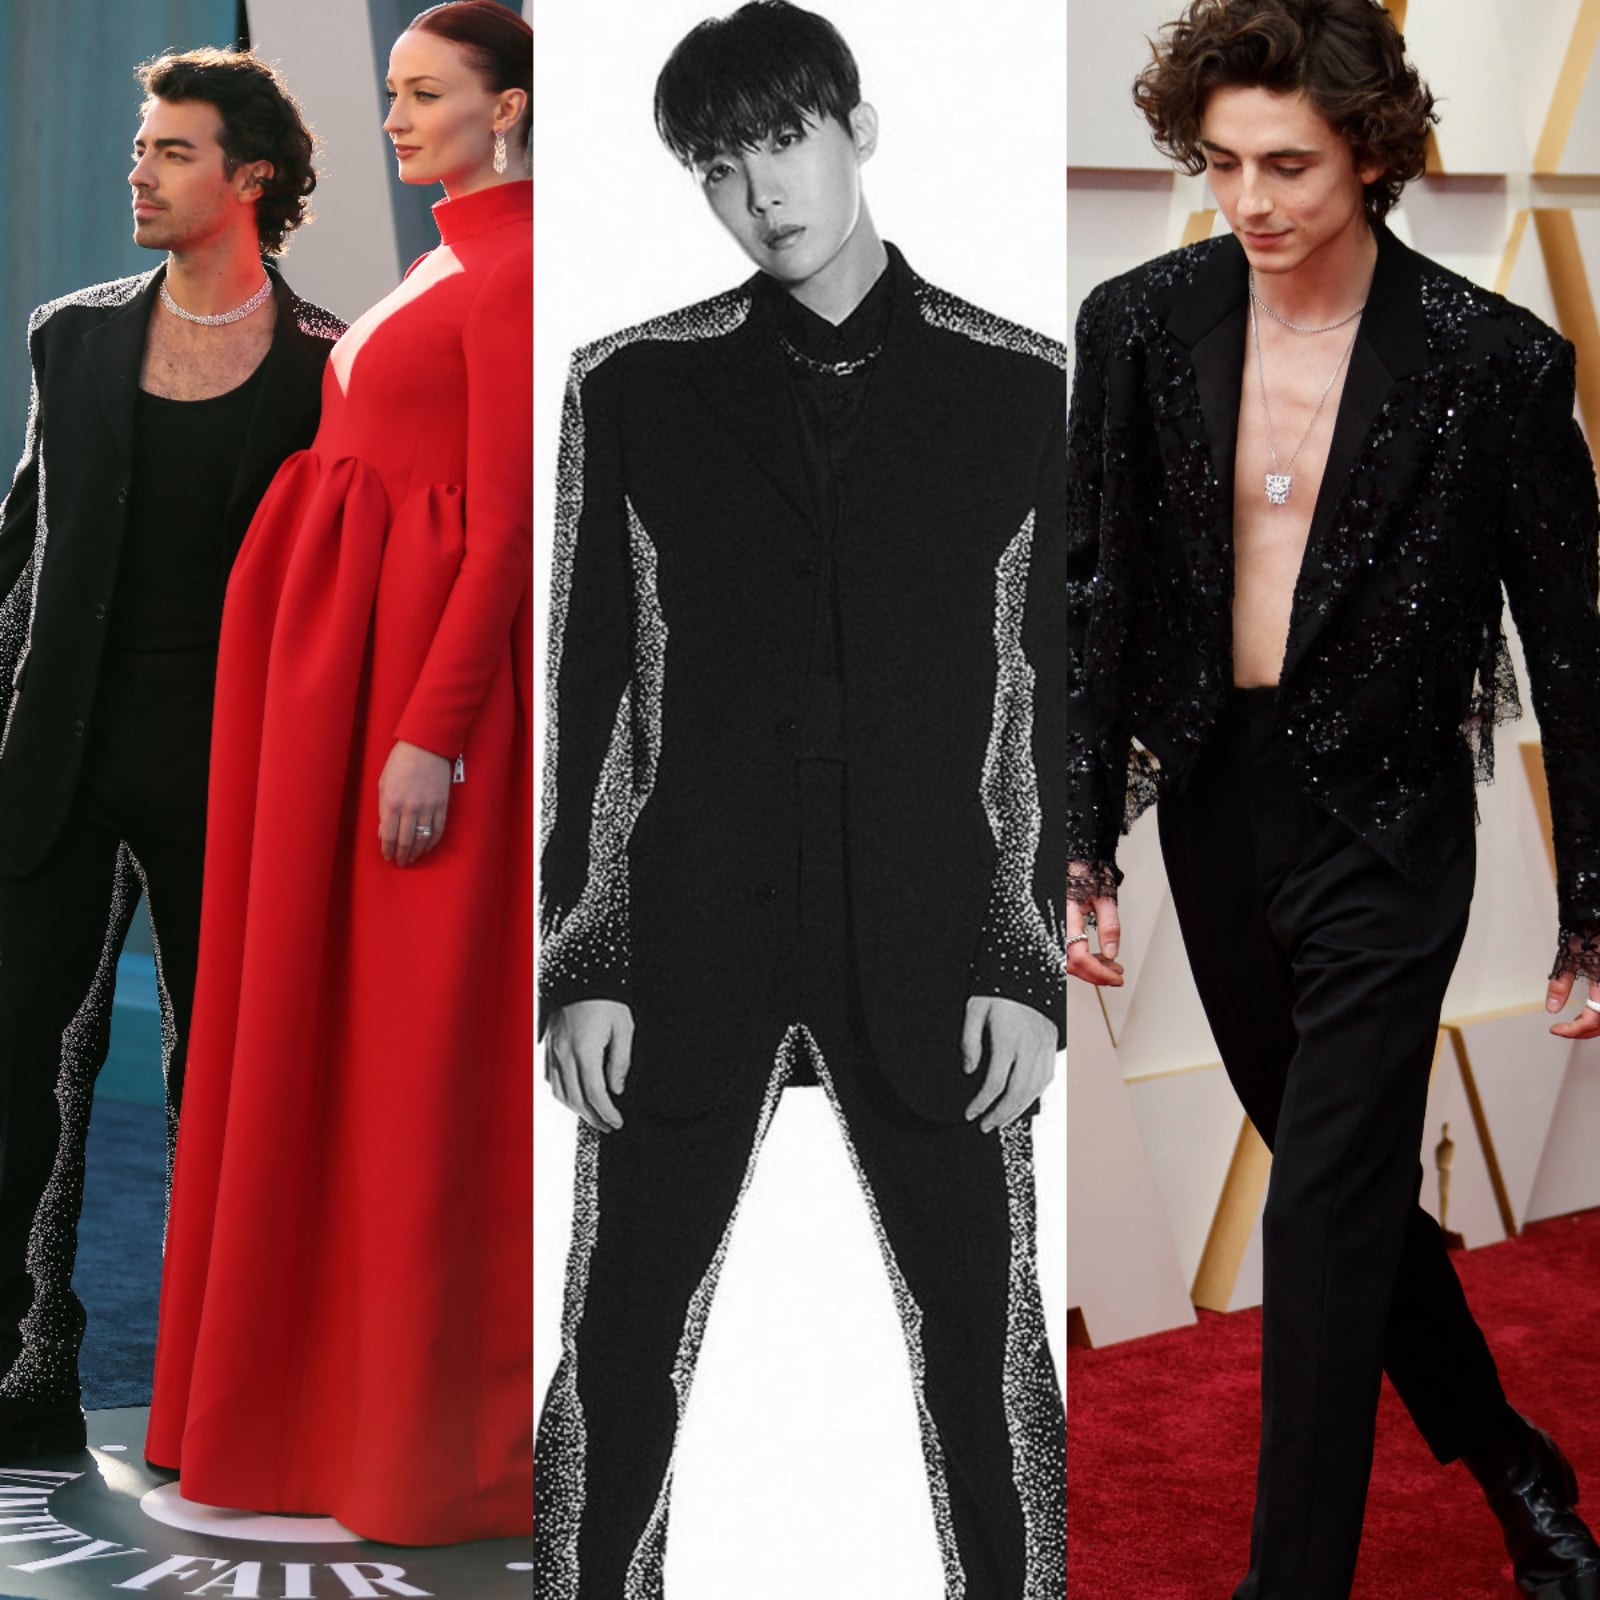 Timothée Chalamet's 2022 Oscars Outfit Is Giving BTS ARMYs Major Jungkook  Vibes - Koreaboo